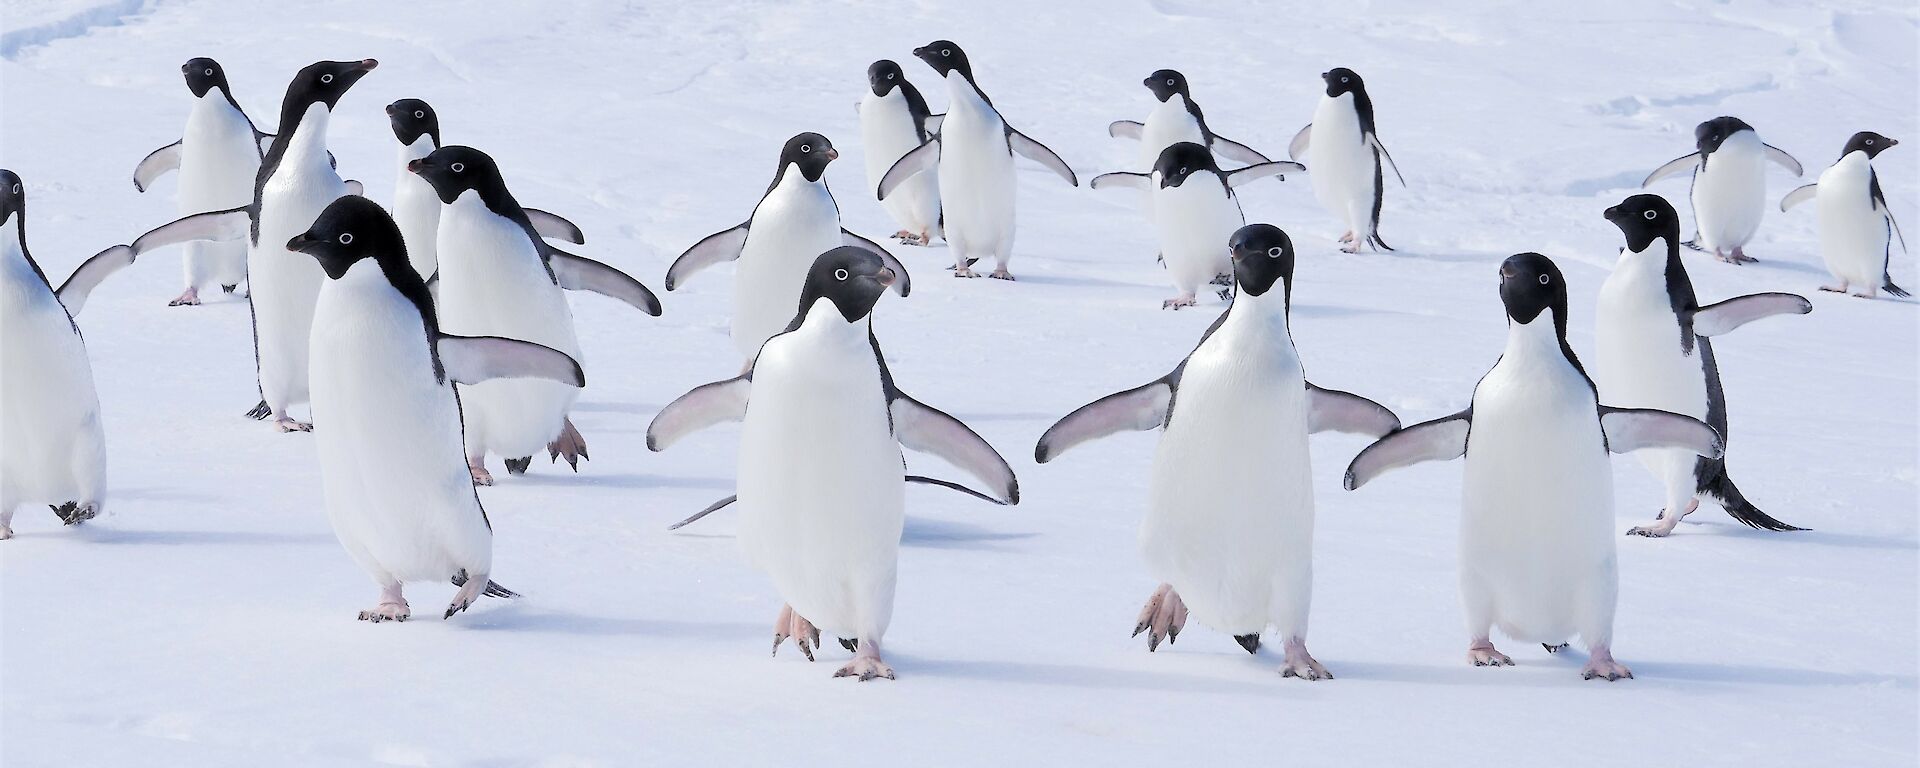 A group of Adelie penguins running towards the camera.